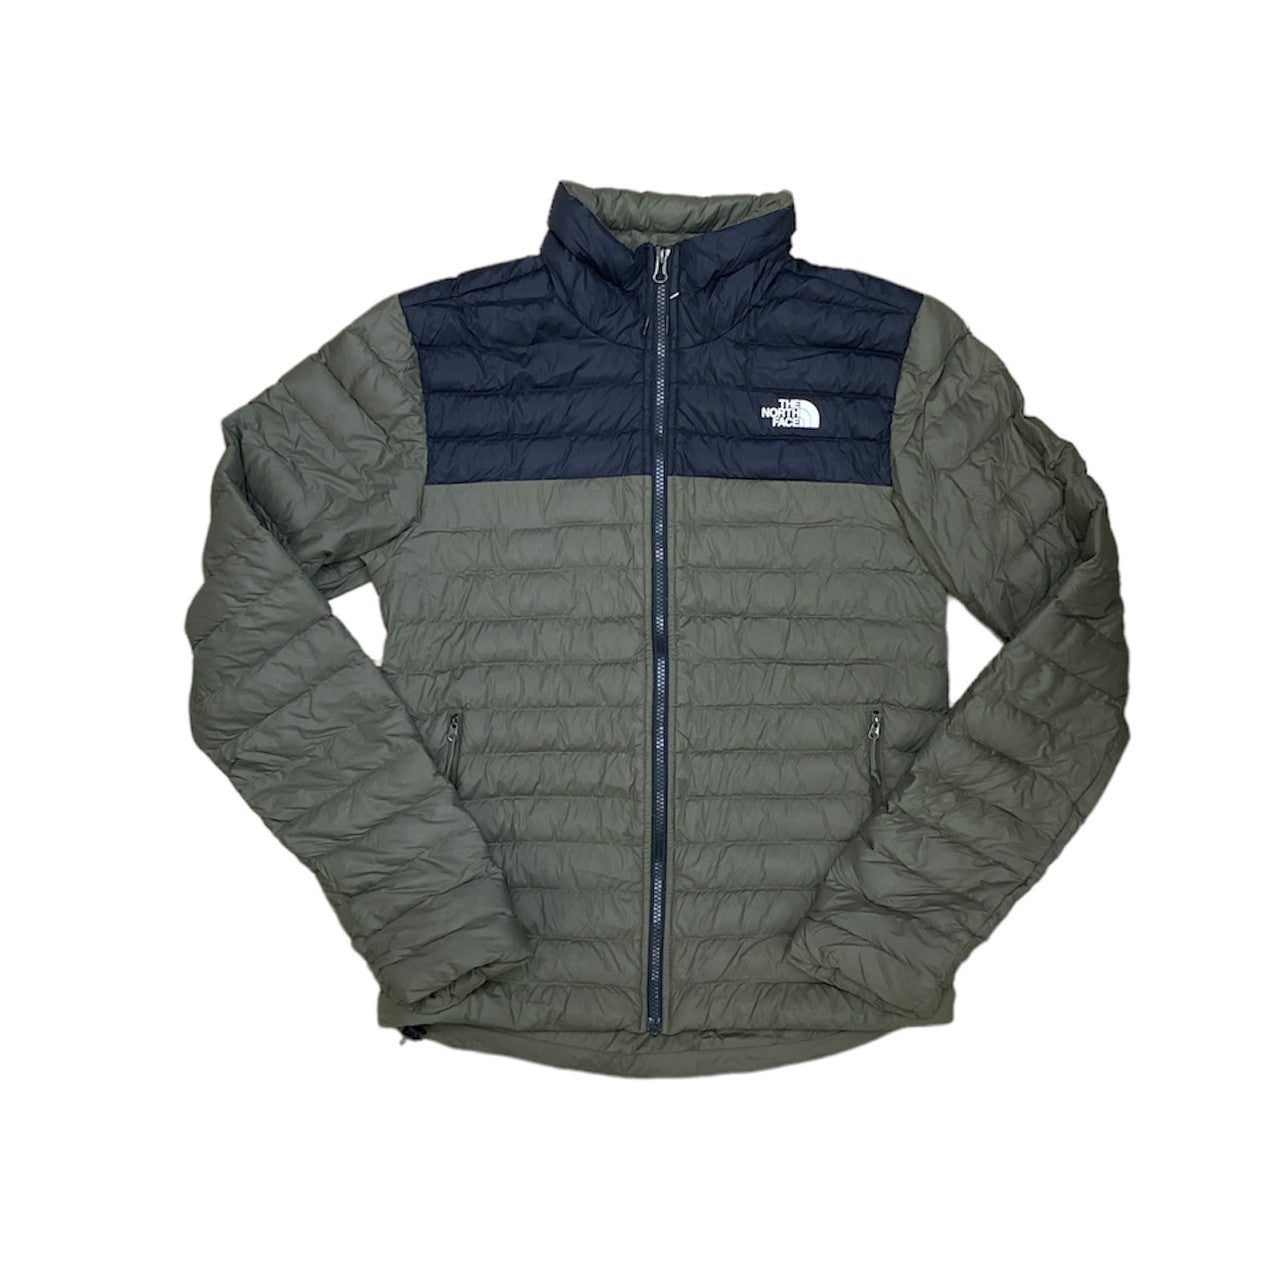 The North Face Stretch Jacket